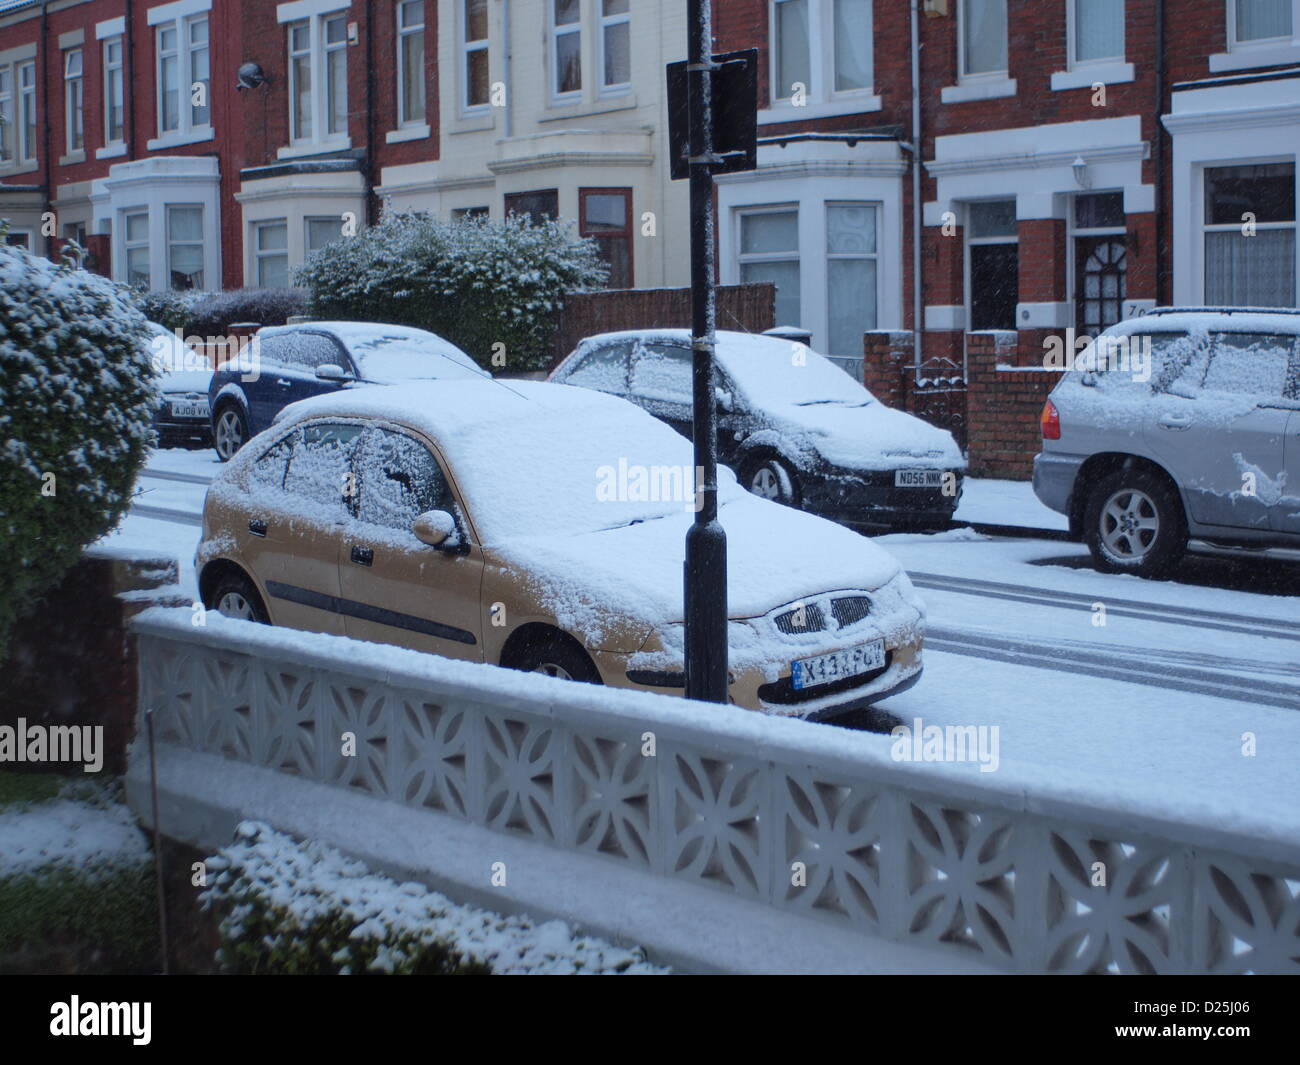 Newcastle, UK. 15th January 2013. Flurries of snow showers sweeping in from the North sea covering stationary cars in the suburbs of Newcastle Upon Tyne. Making driving difficult as the snow begins to settle.  Credit:  james walsh / Alamy Live News Stock Photo